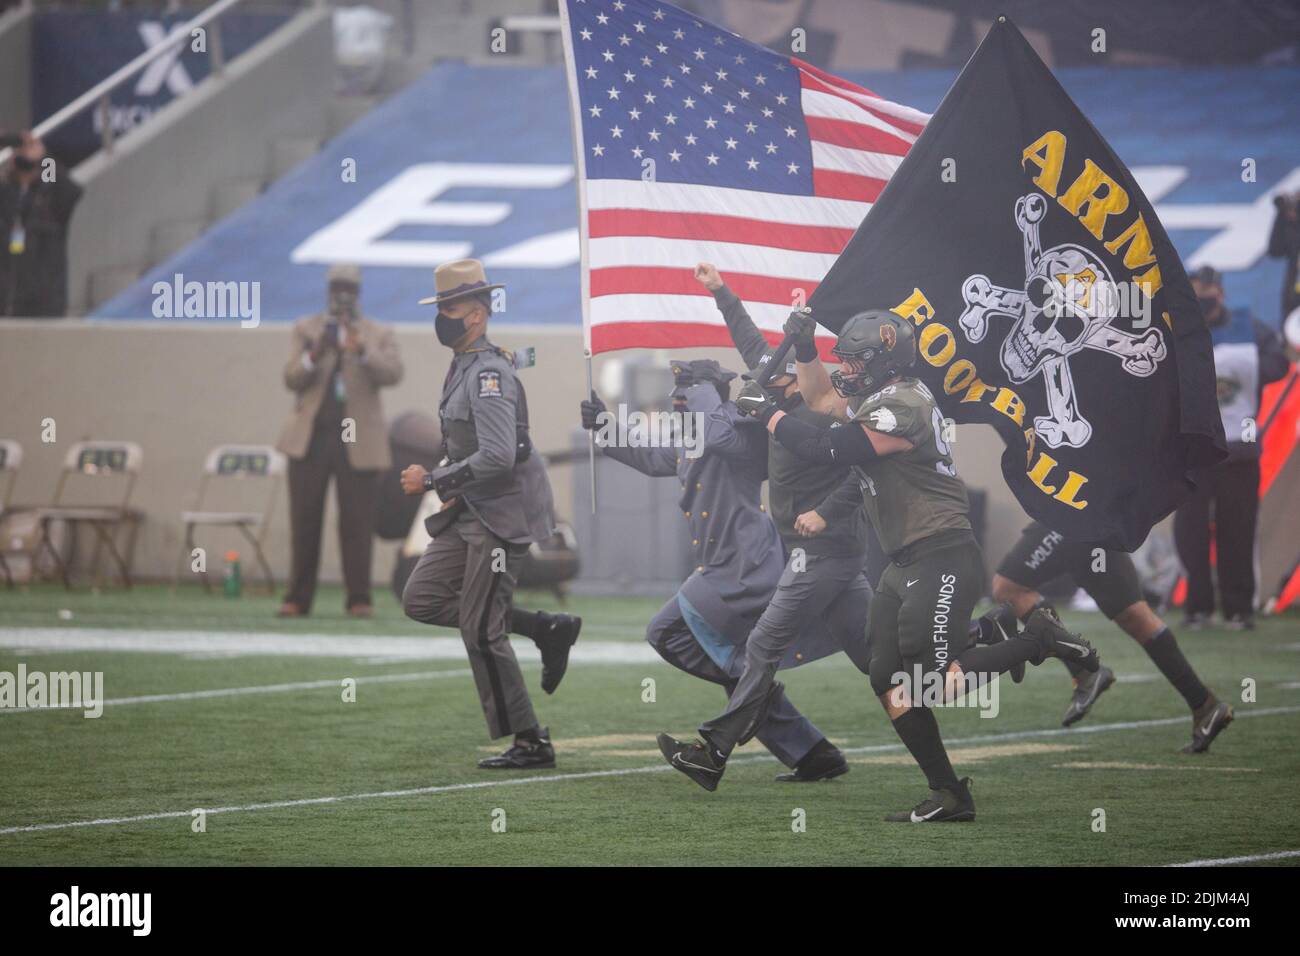 U.S. Navy midshipmen and Army Black Knights take the field at the start of the 121st Army-Navy football game at Michie Stadium December 12, 2019 in West Point, New York. The Army Black Knights shutout the Navy Midshipmen 15-0. Stock Photo